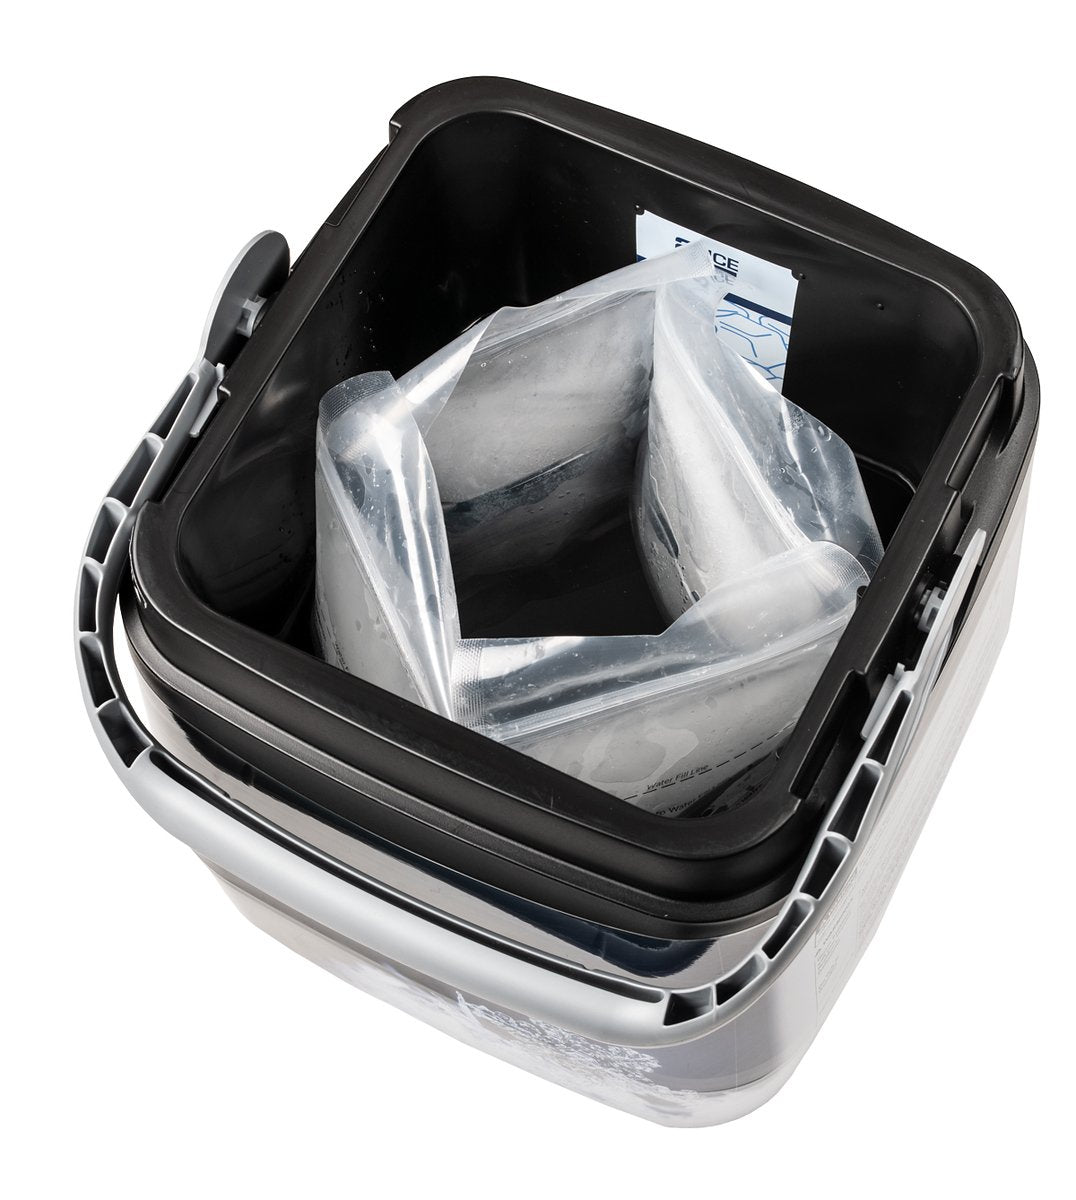 $15 Special - Ice Freeze Bags (Kit of 12)